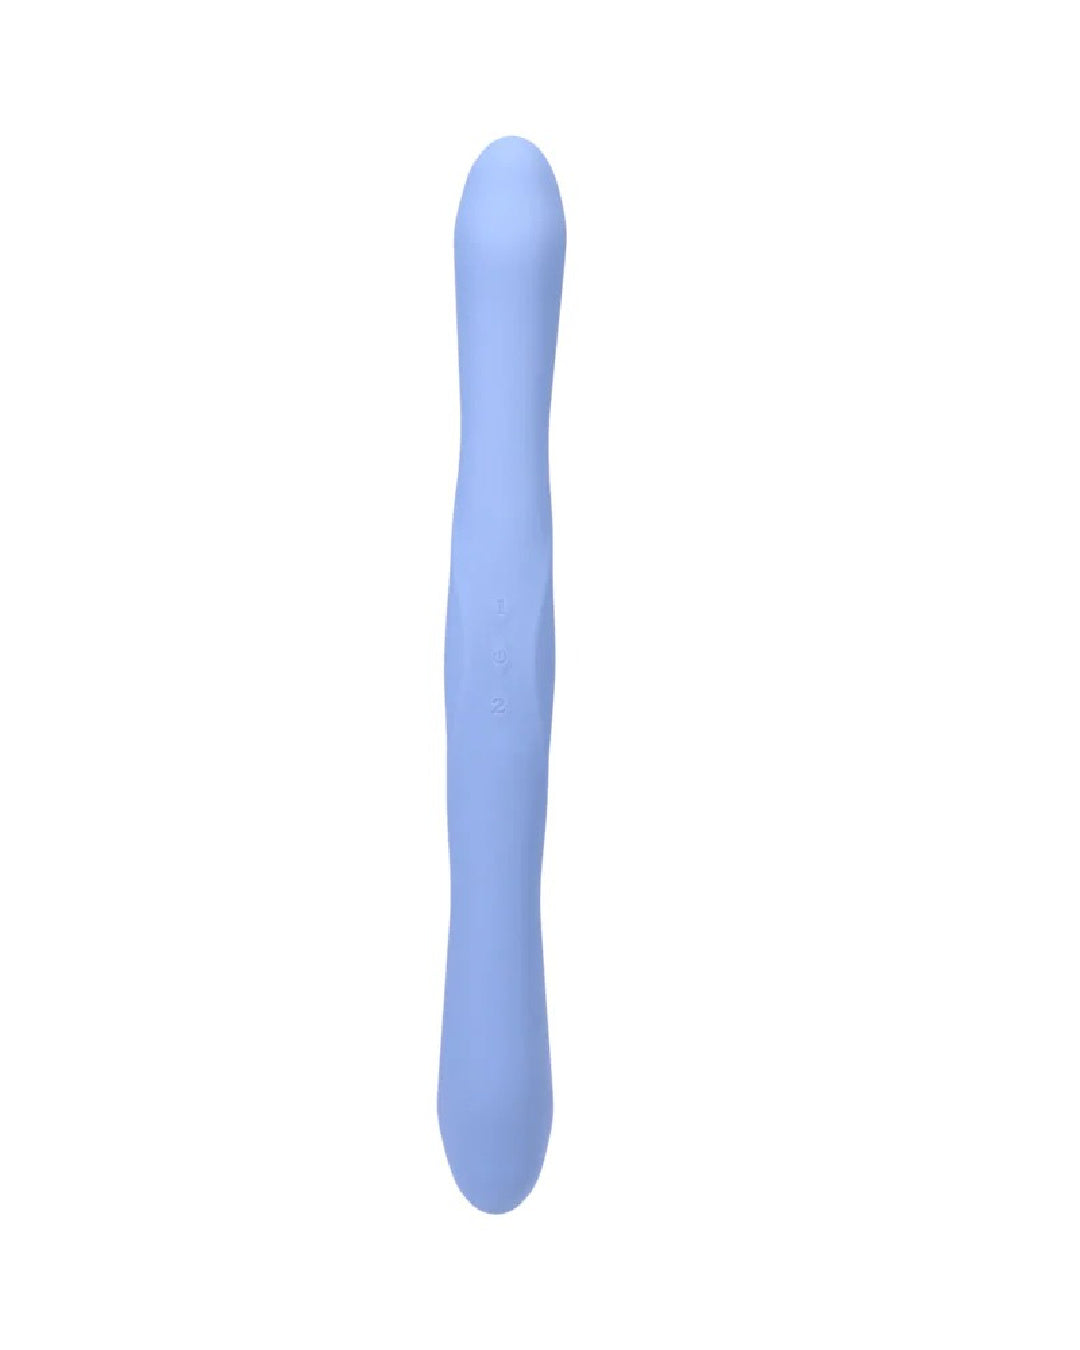 Tryst Duet Double Ended Vibrator with Remote - Dildo positioned sideways showing its curves